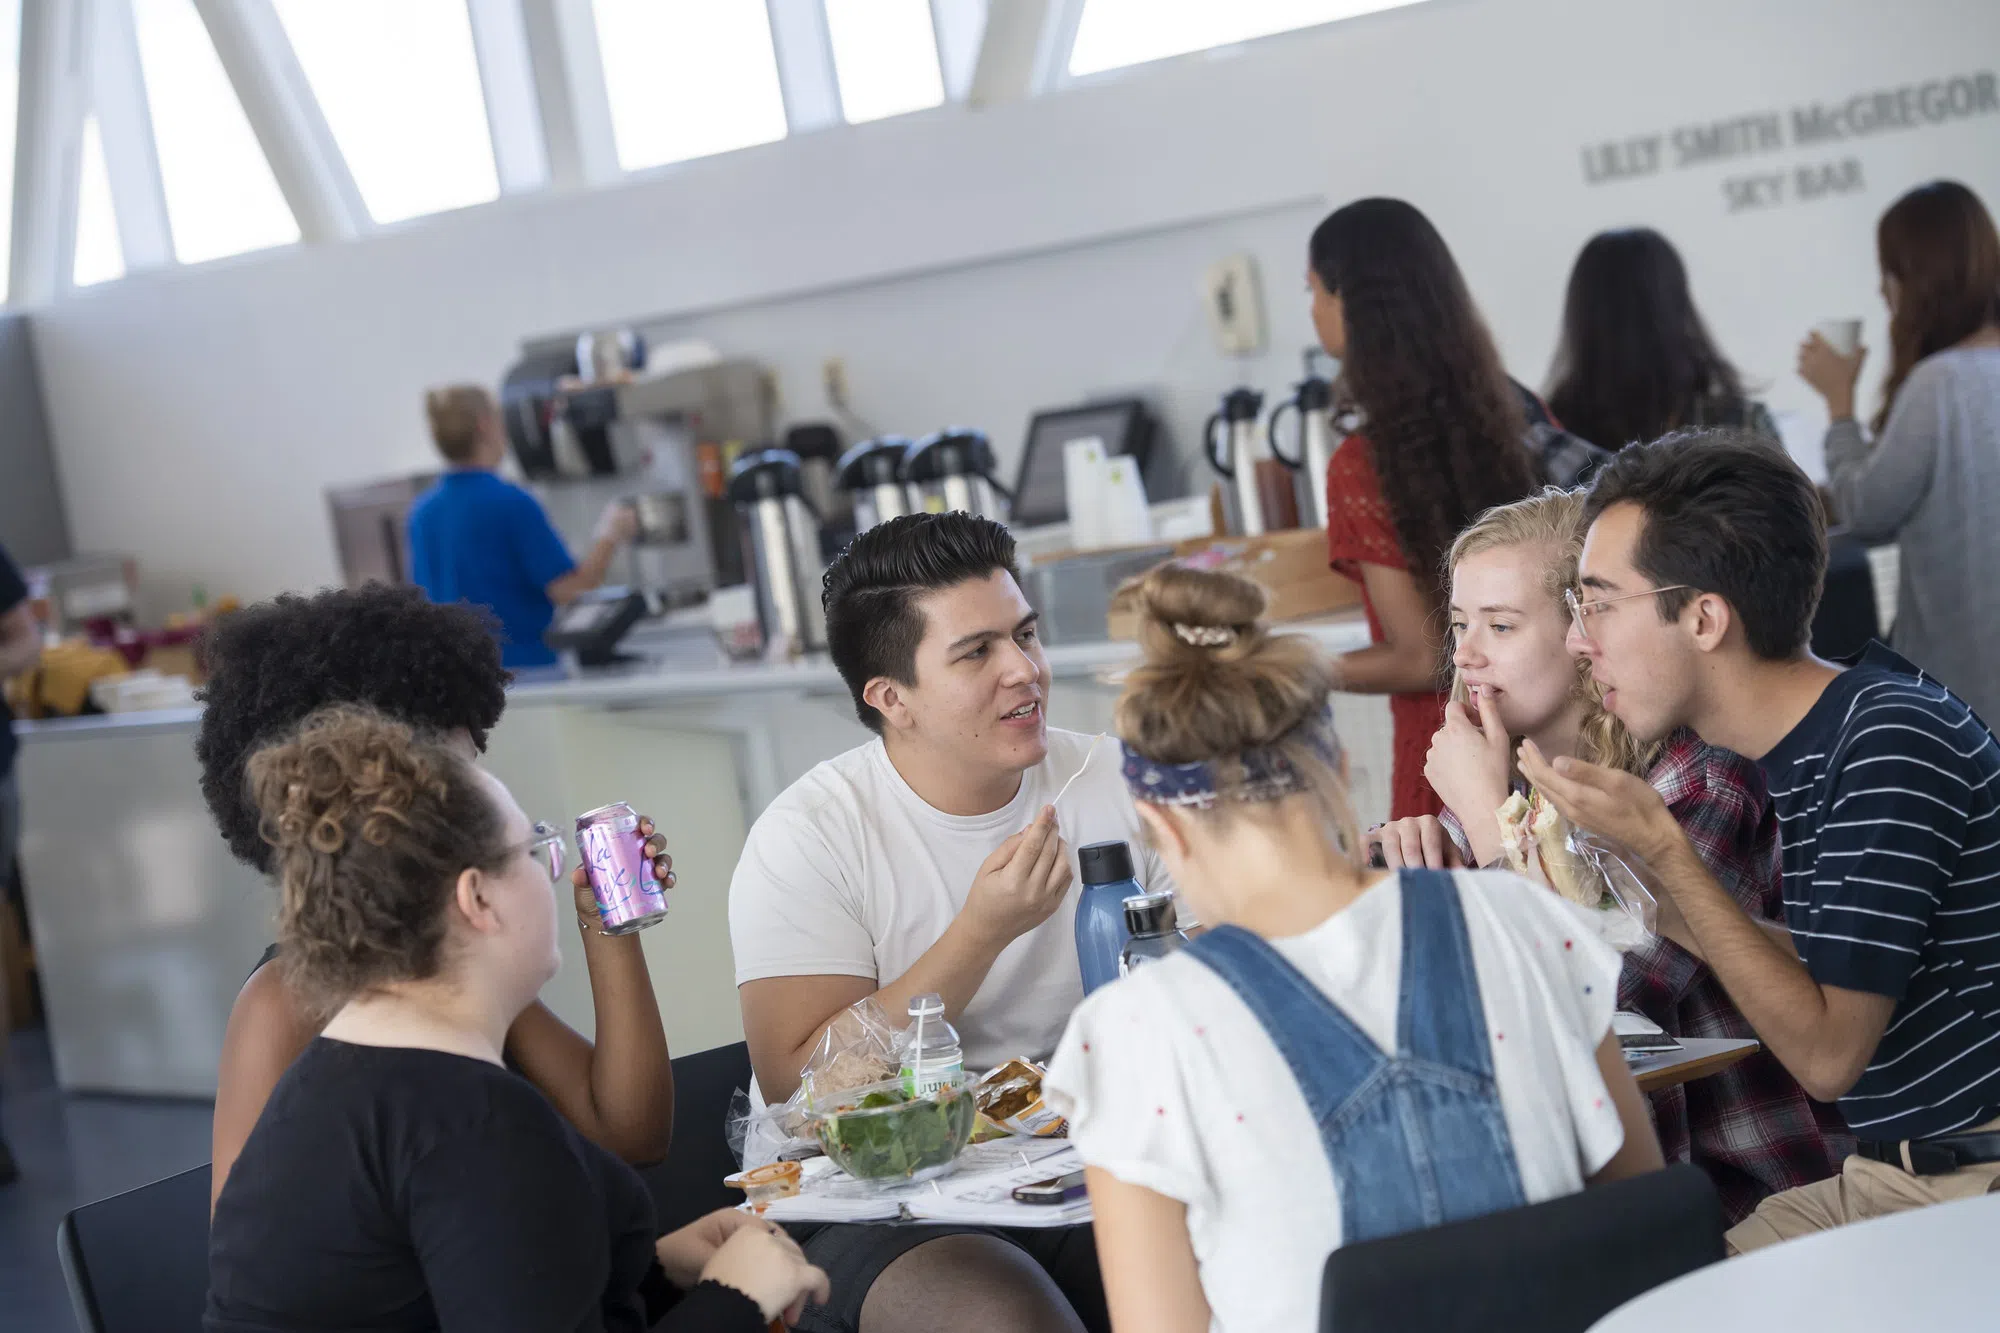 Students enjoy a meal in Oberlin's Sky Bar cafe which is located in Oberlin's conservatory